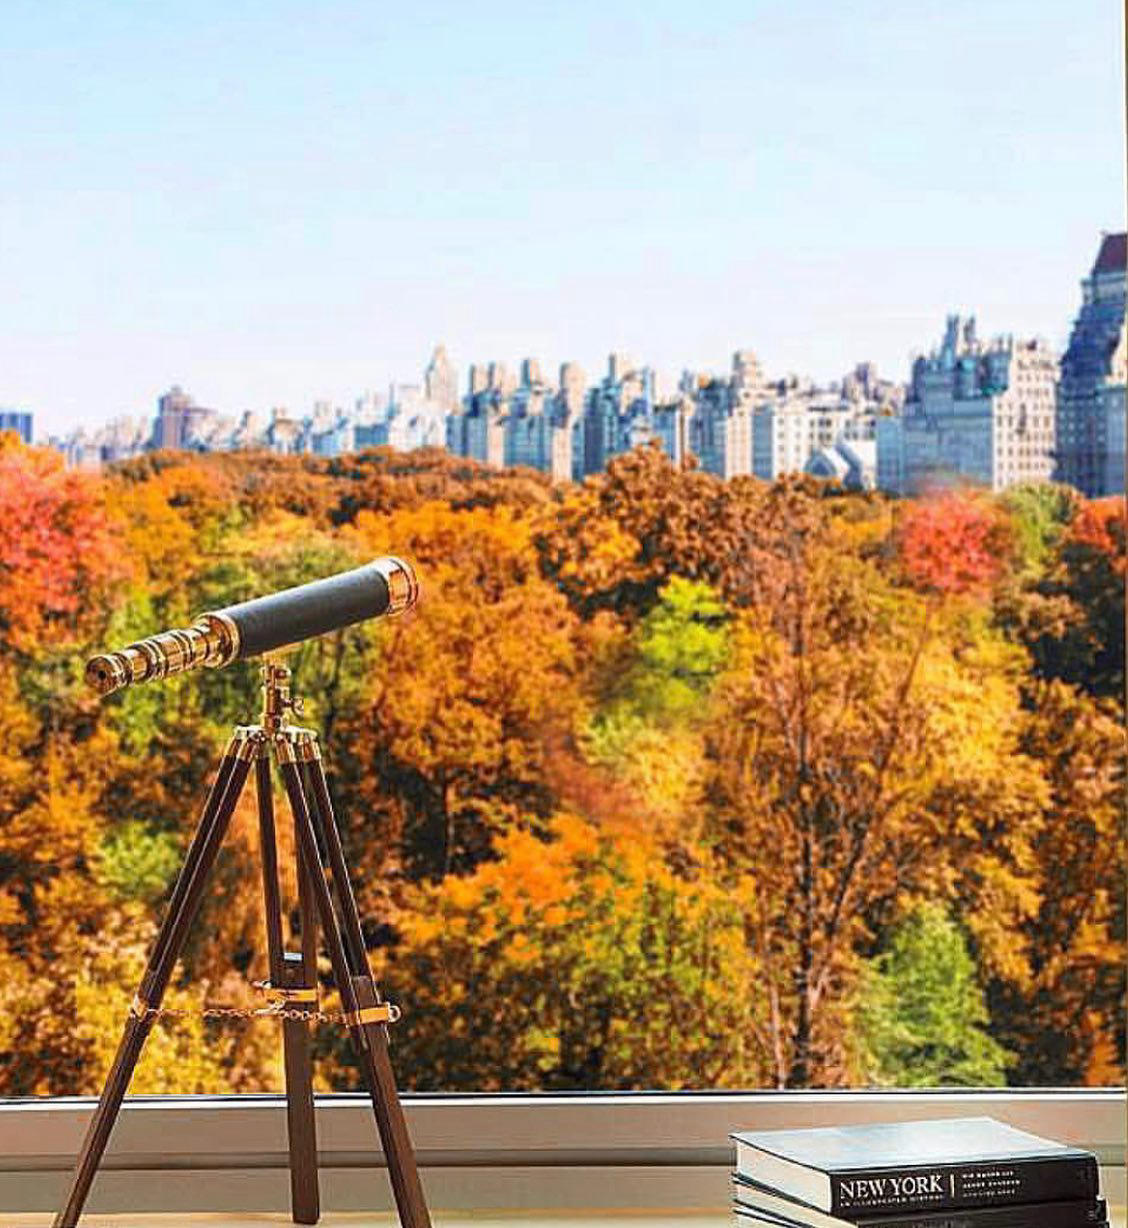 image  1 The Ritz-Carlton New York, Central Park - Tis’ the season to fall in love with New York